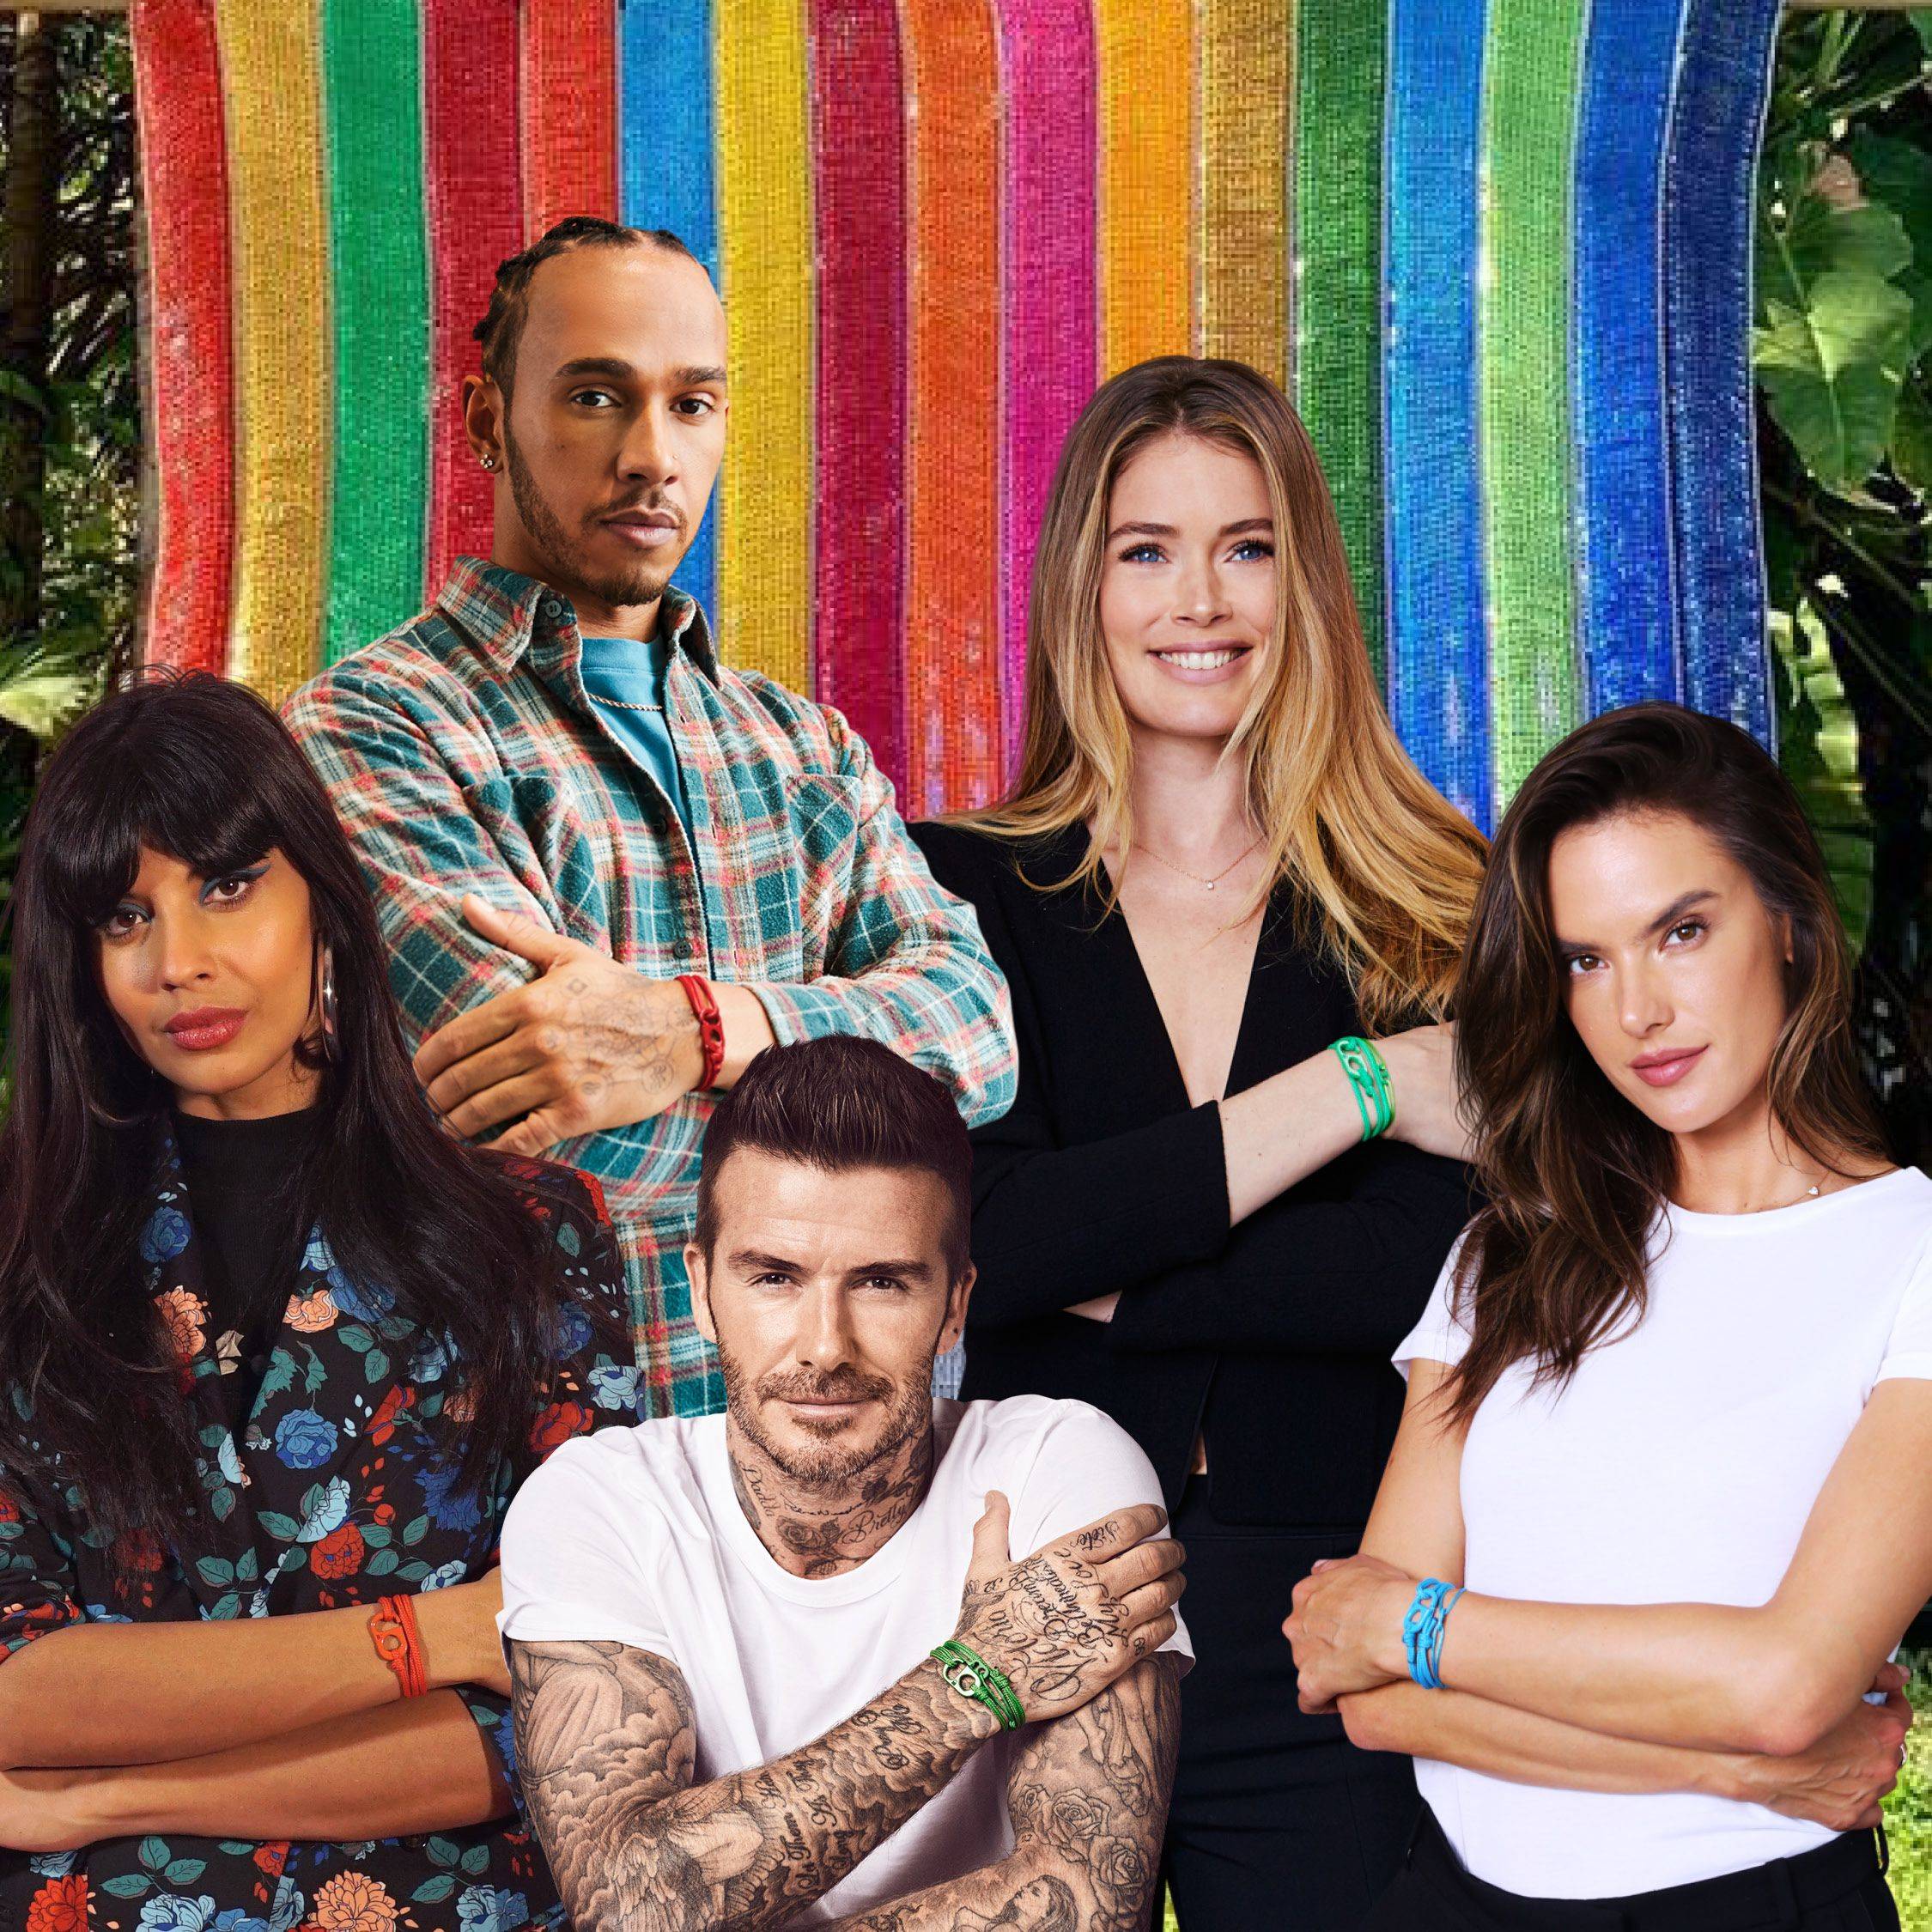 Lewis Hamilton Doutzen Kroes Alessandra Ambrosio David Beckham and Jameela Jamil in front of the #TOGETHERBAND tapestry